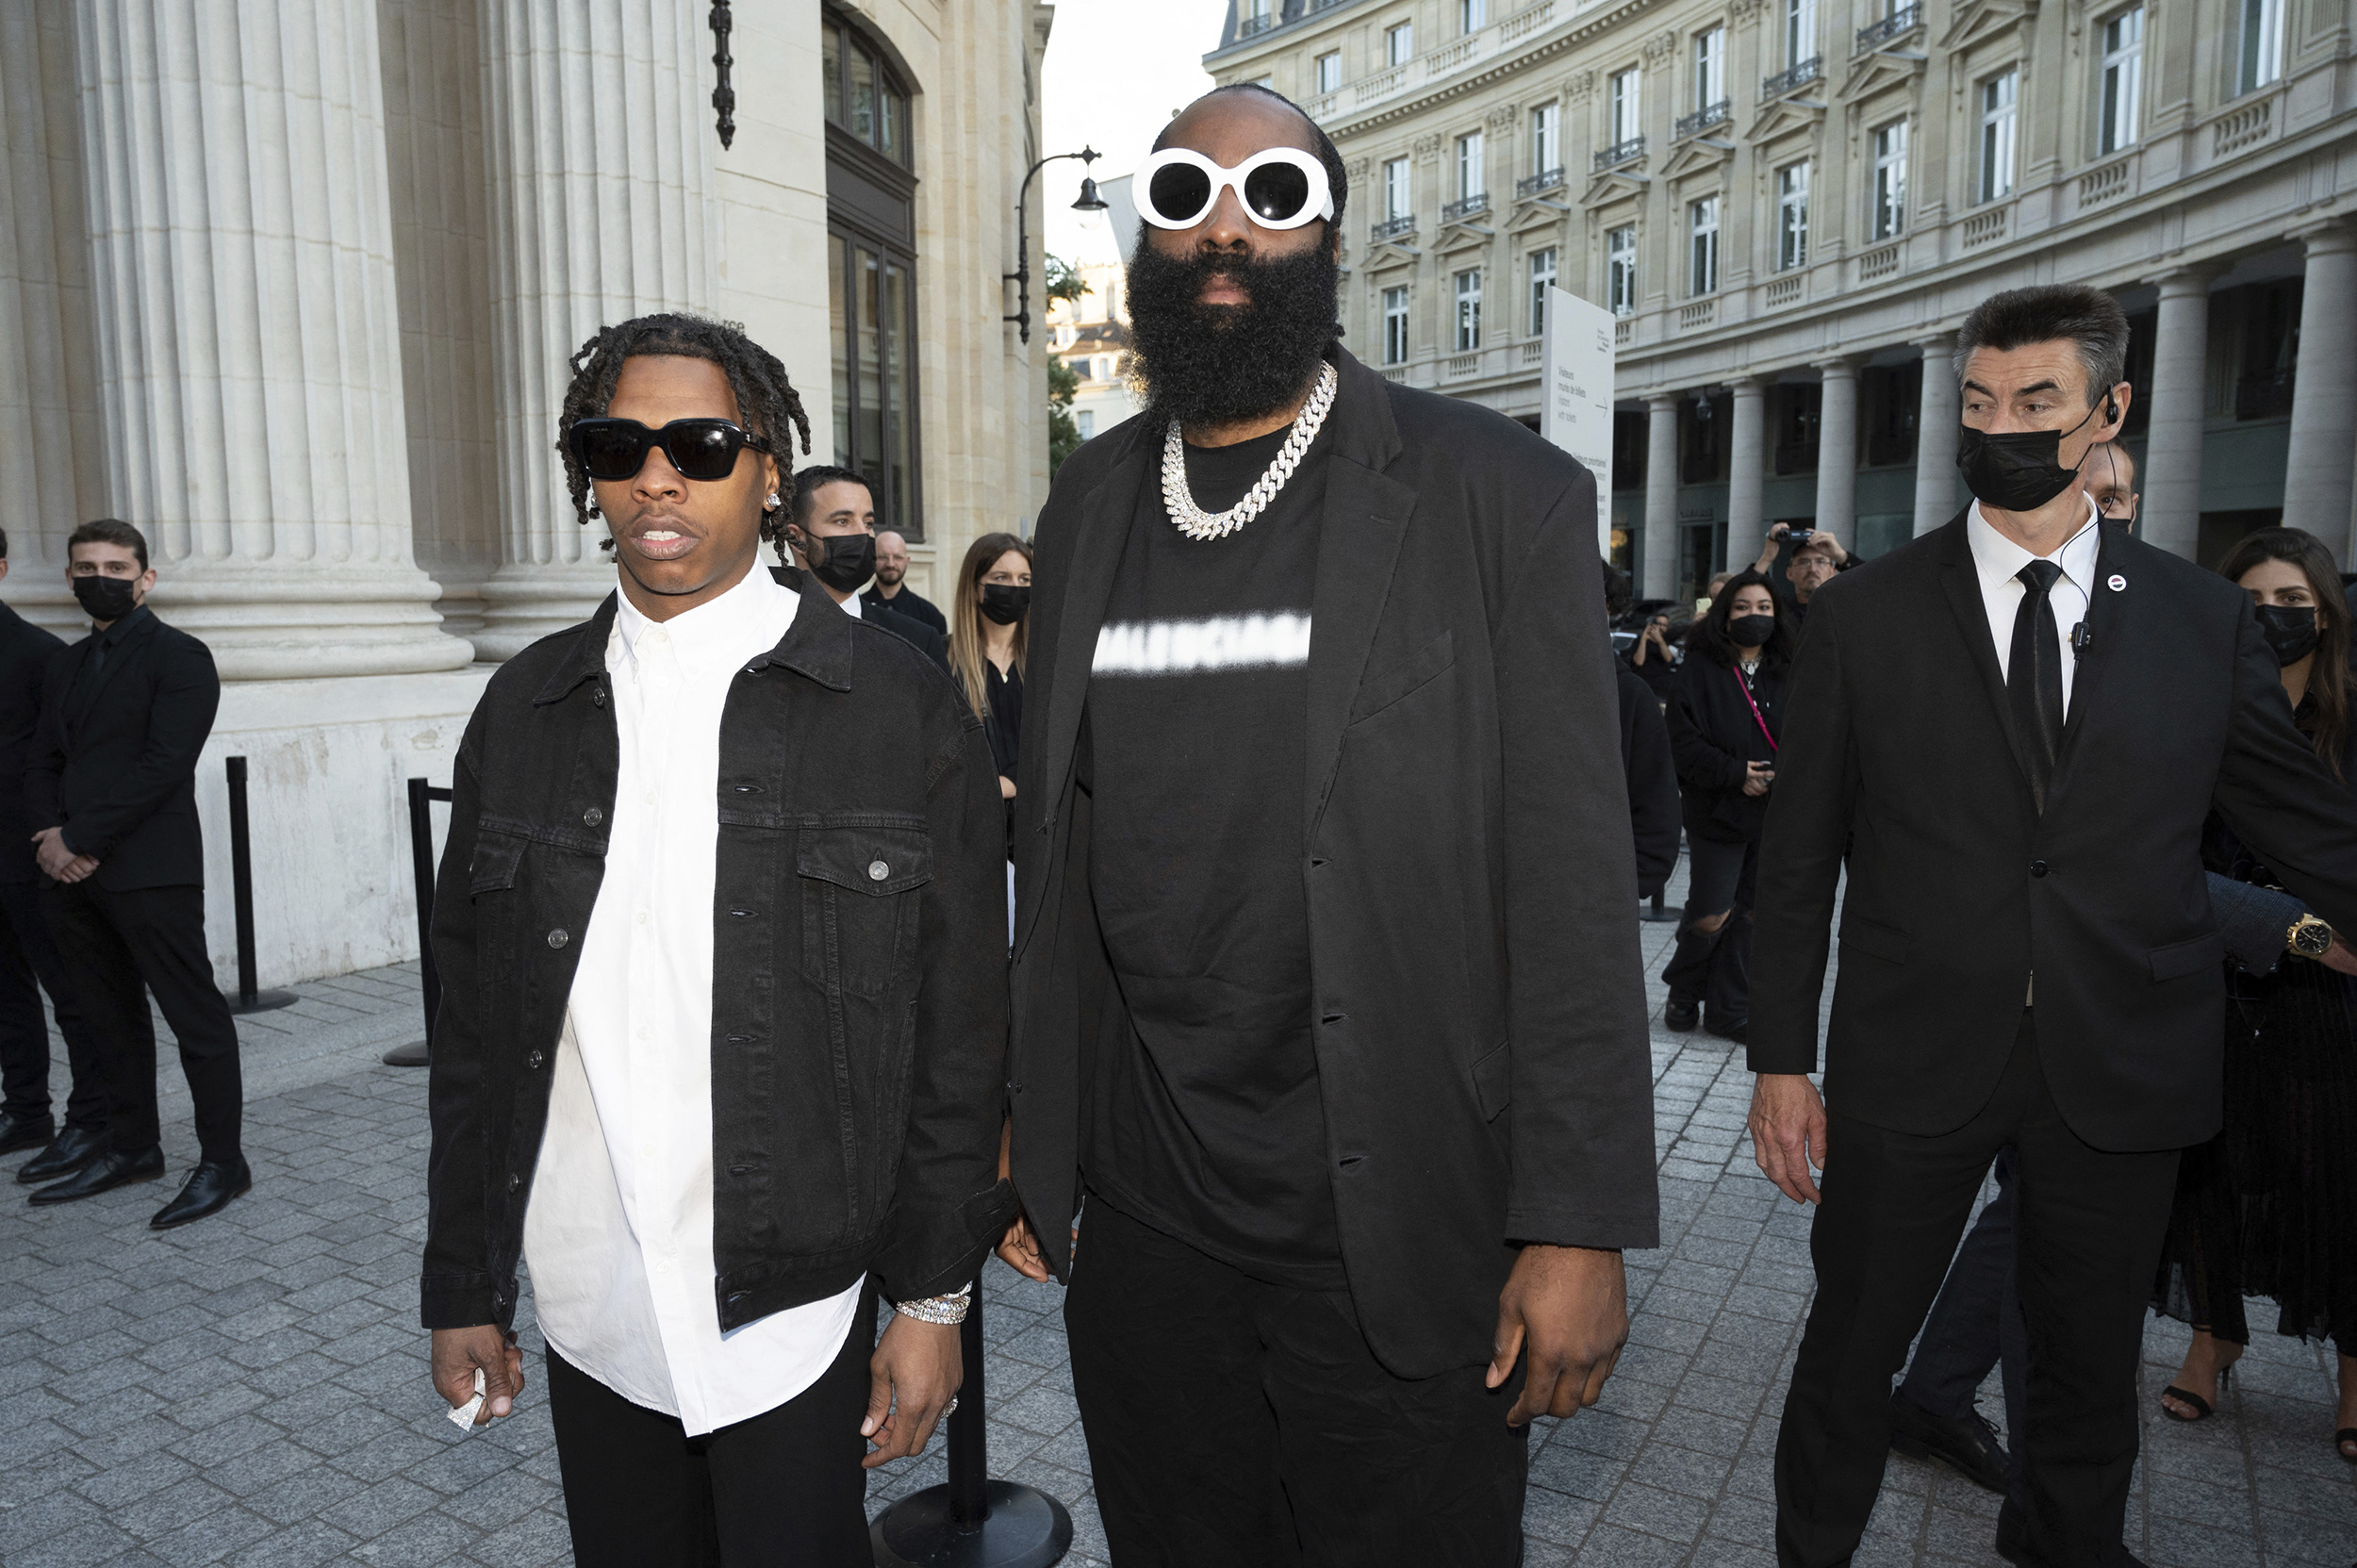 LIL BABY AND JAMES HARDEN HAVE BEEN ARRESTED IN PARIS, ACCORDING TO FRENCH REPORTS.